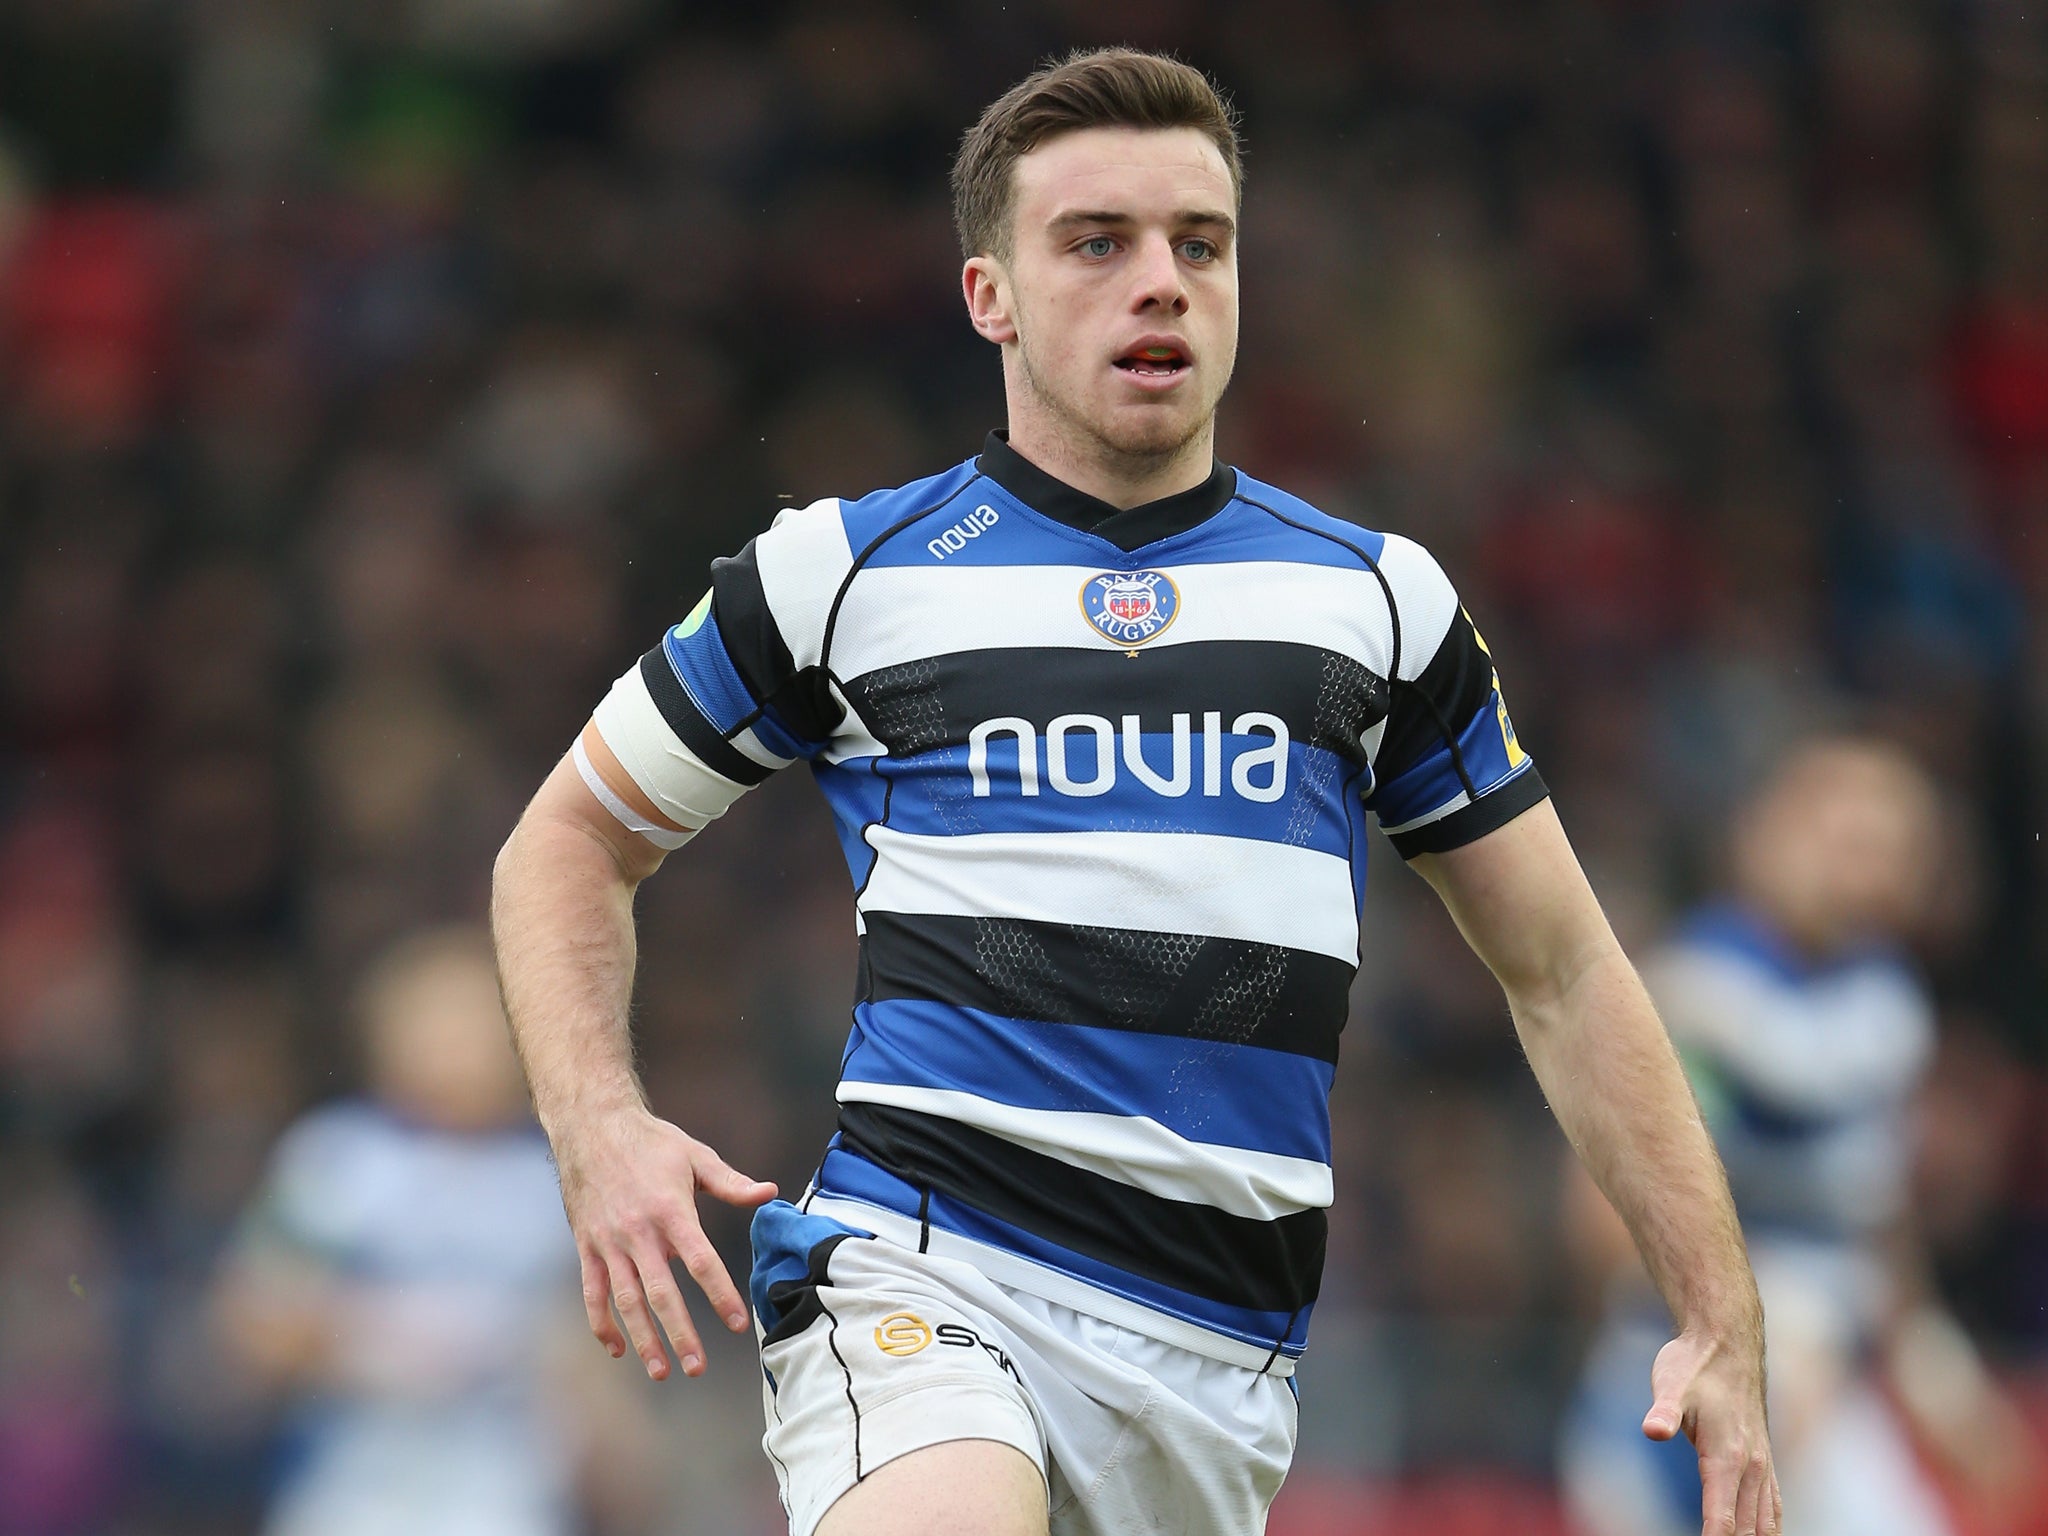 Bath and England fly-half George Ford scores 12 points in his side's victory over Exeter Chiefs